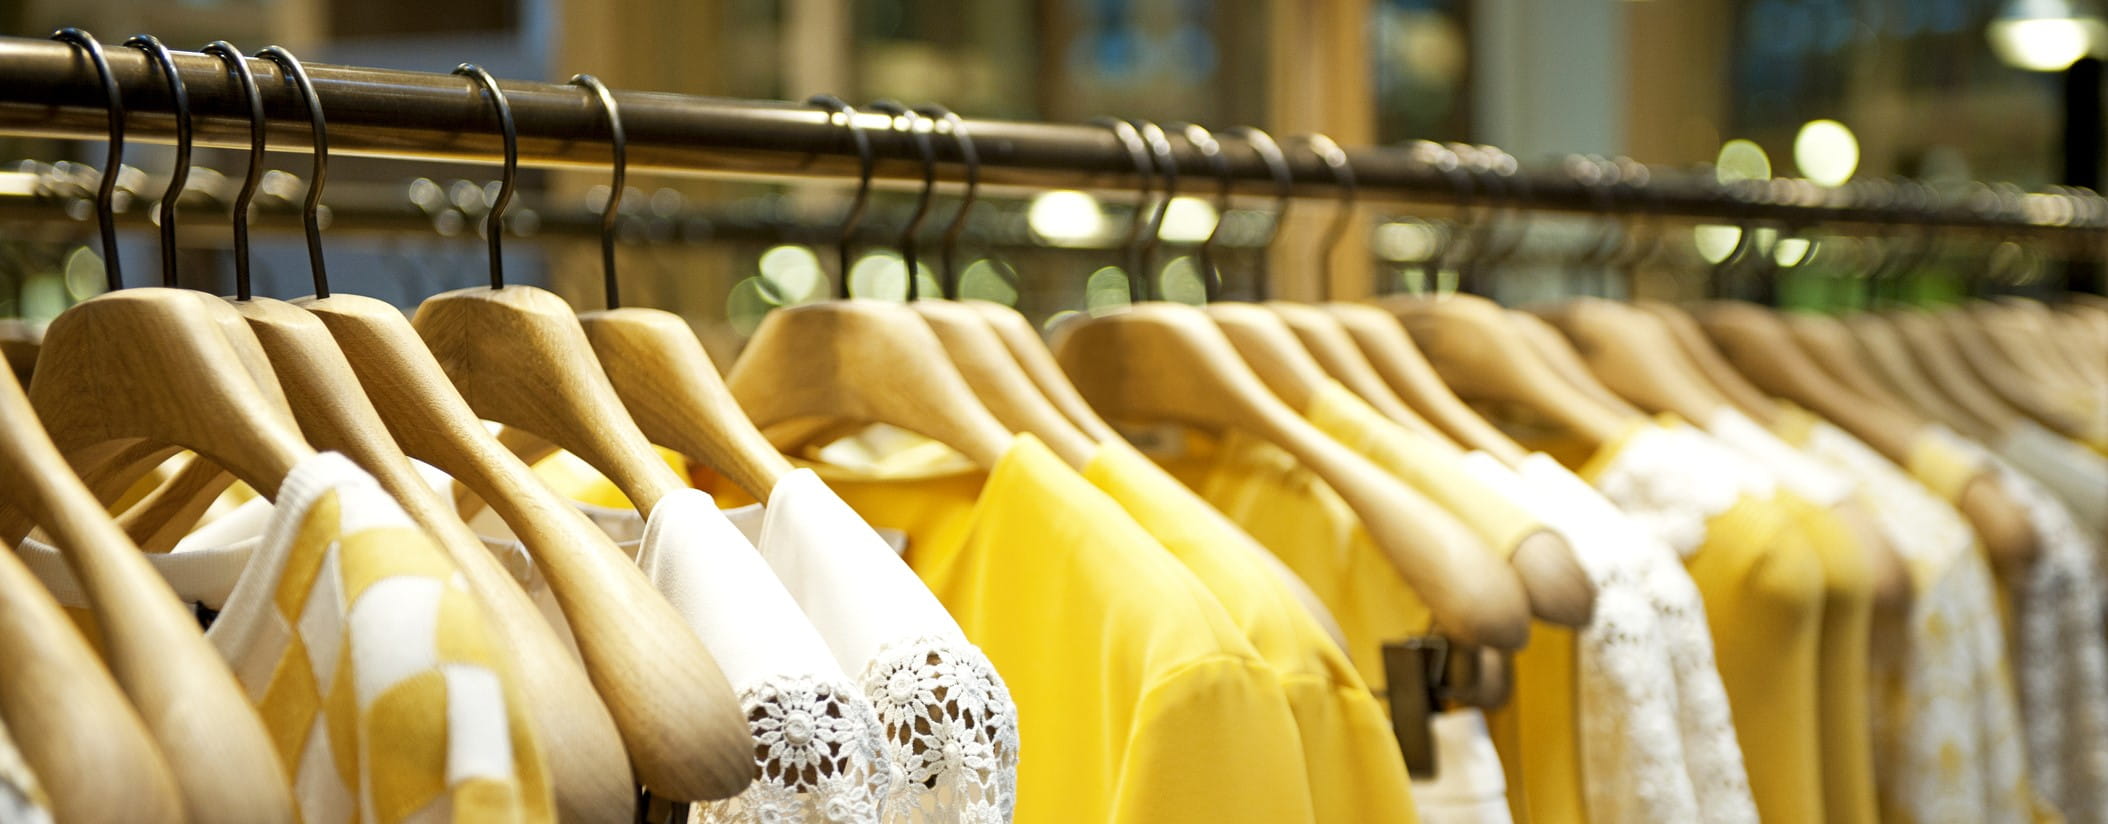 Yellow and white clothes hang on wood hangers, tightly packed on a clothing rack 